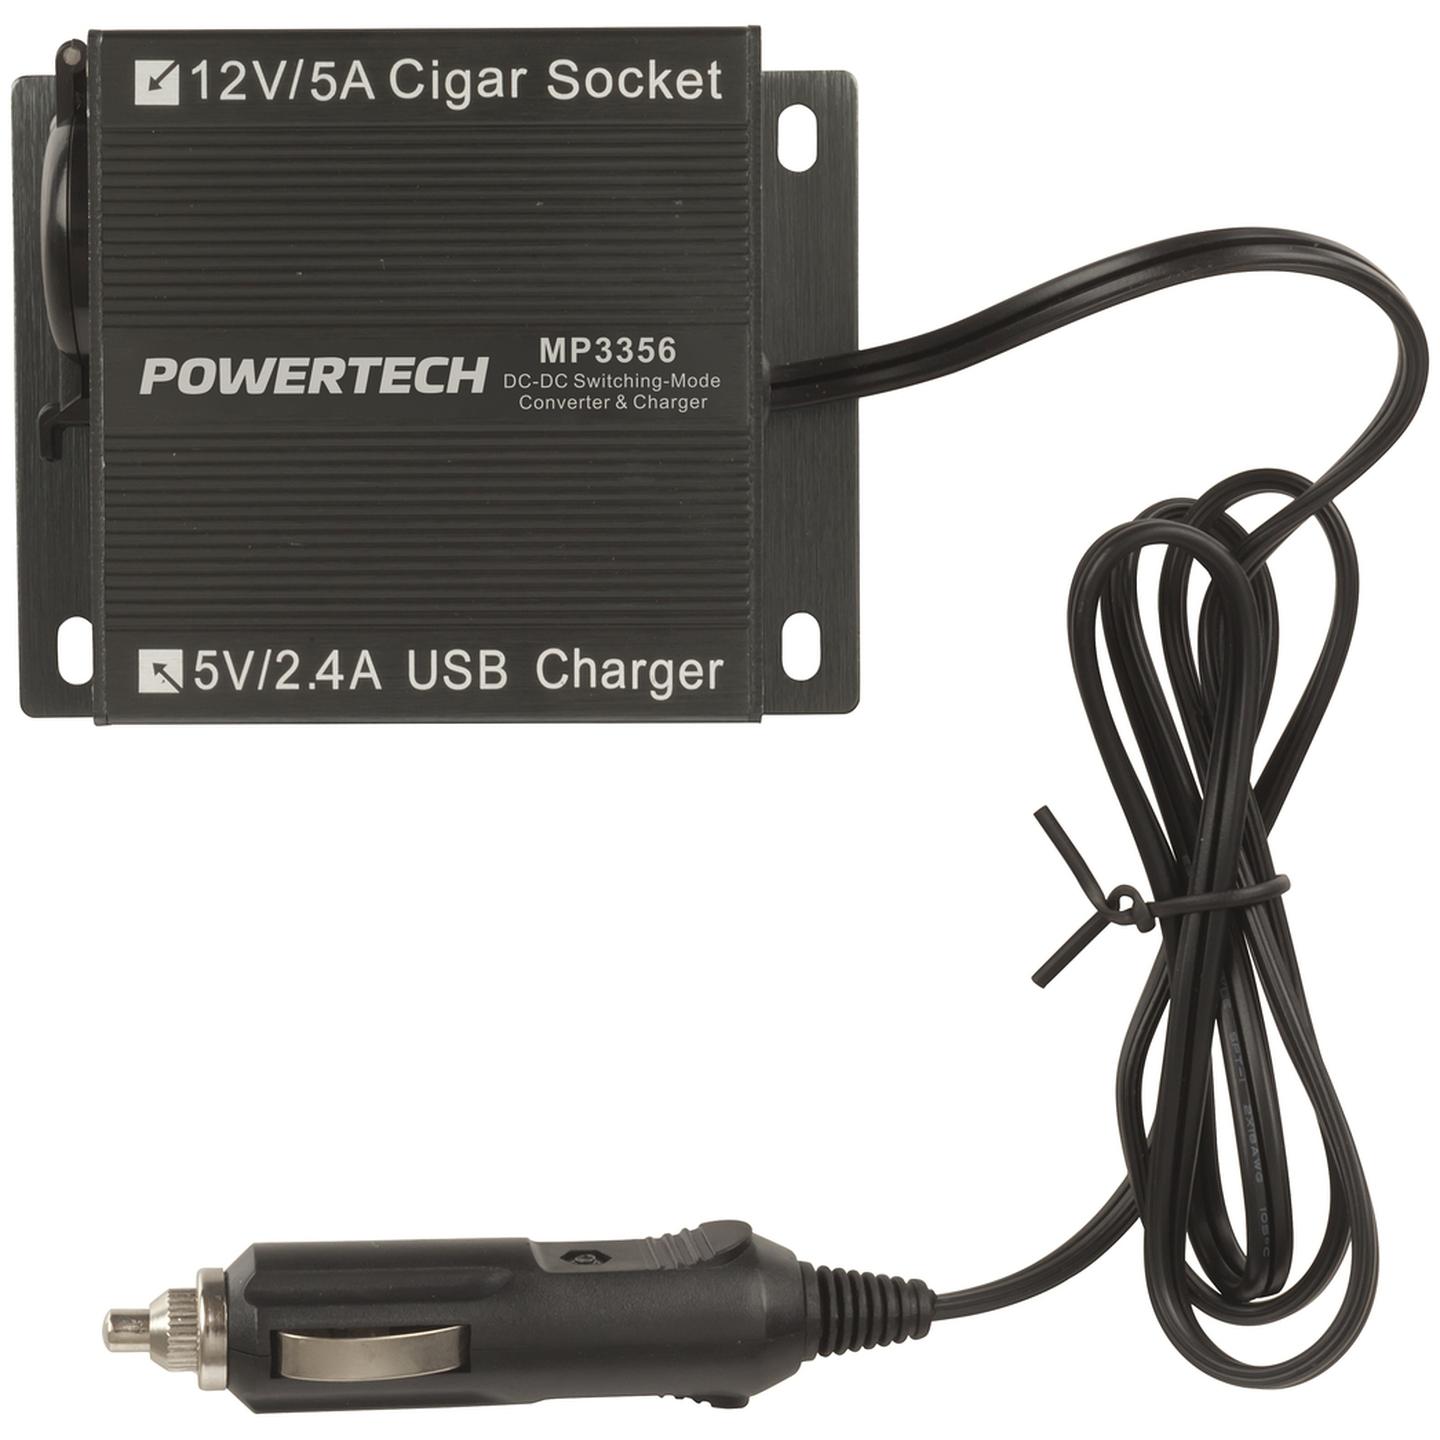 24V-12V 5A DC-DC Converter with USB Charge